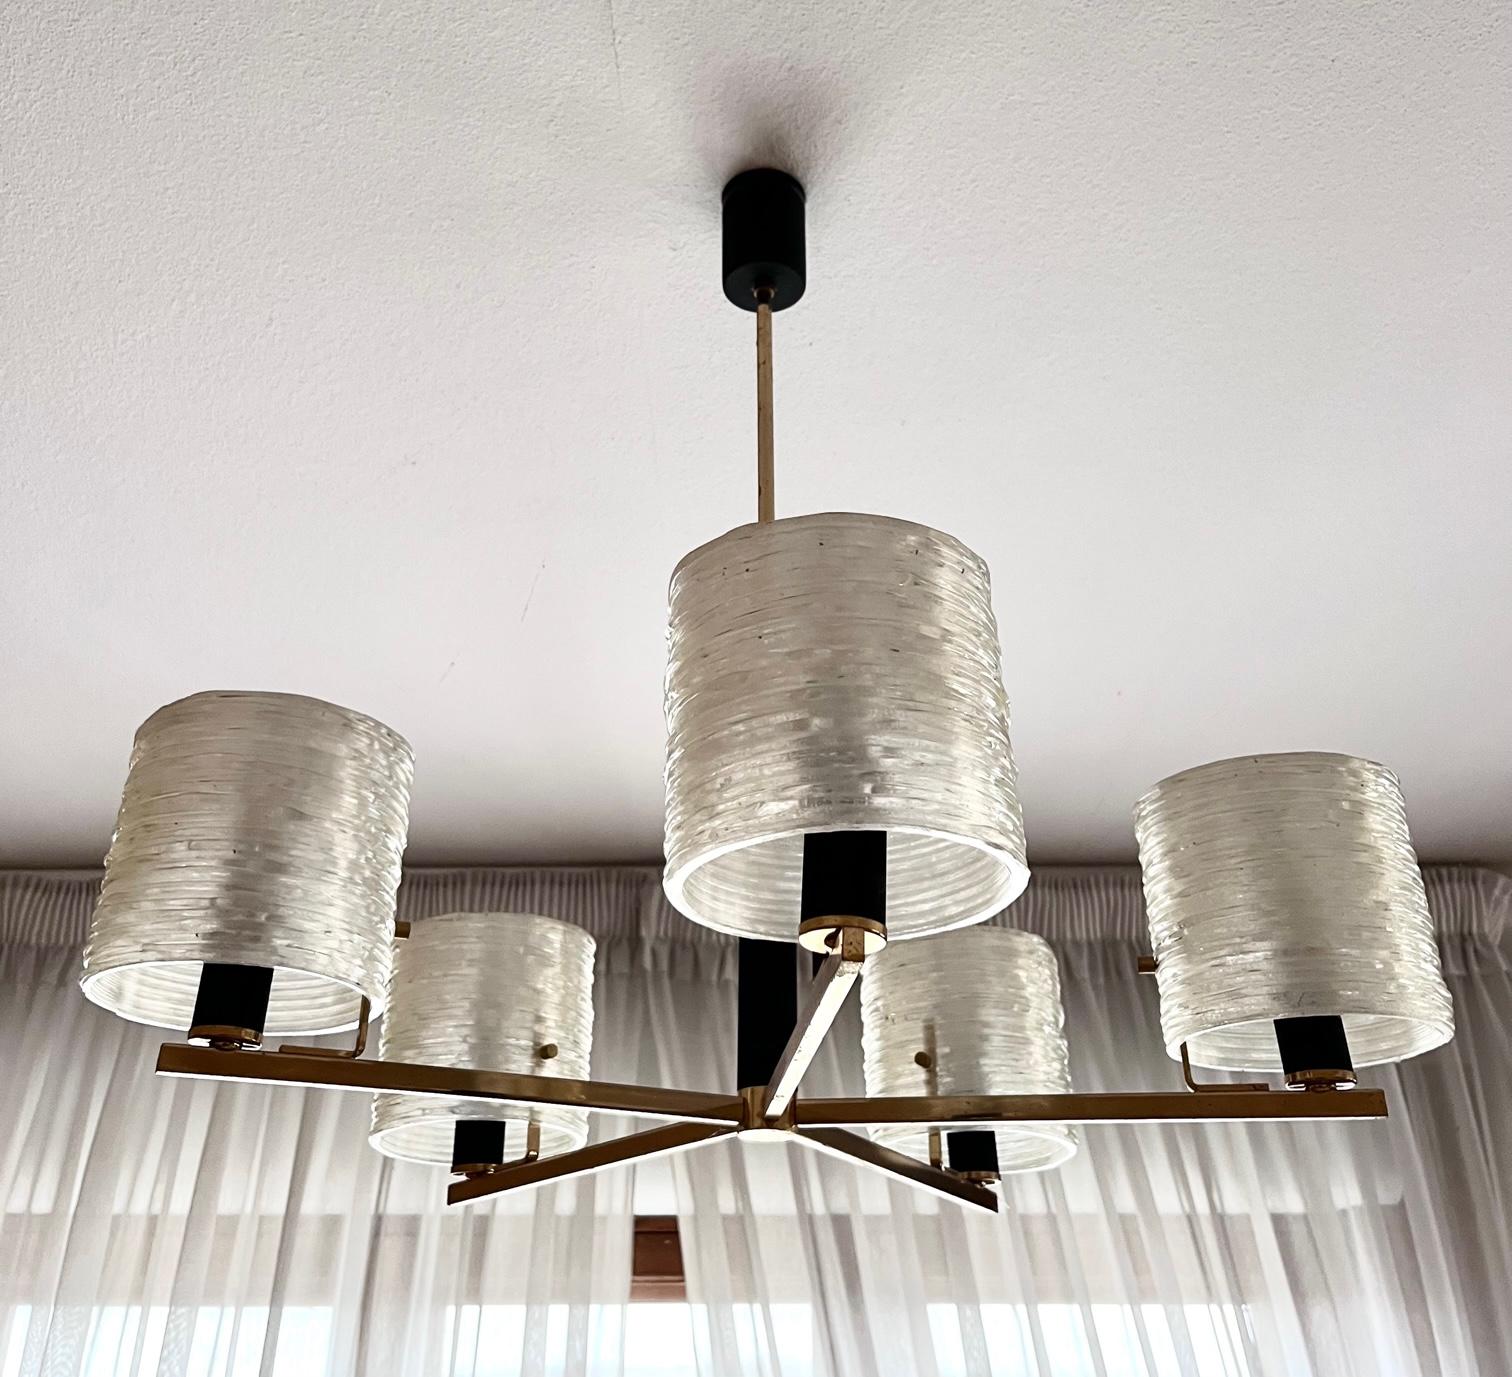 Beautiful fixture made by Maison Arlus in the 1950's 
Structure in gilden metal and shade in pearly shades that turns the room in a warm atmosphere when the light is turned on.